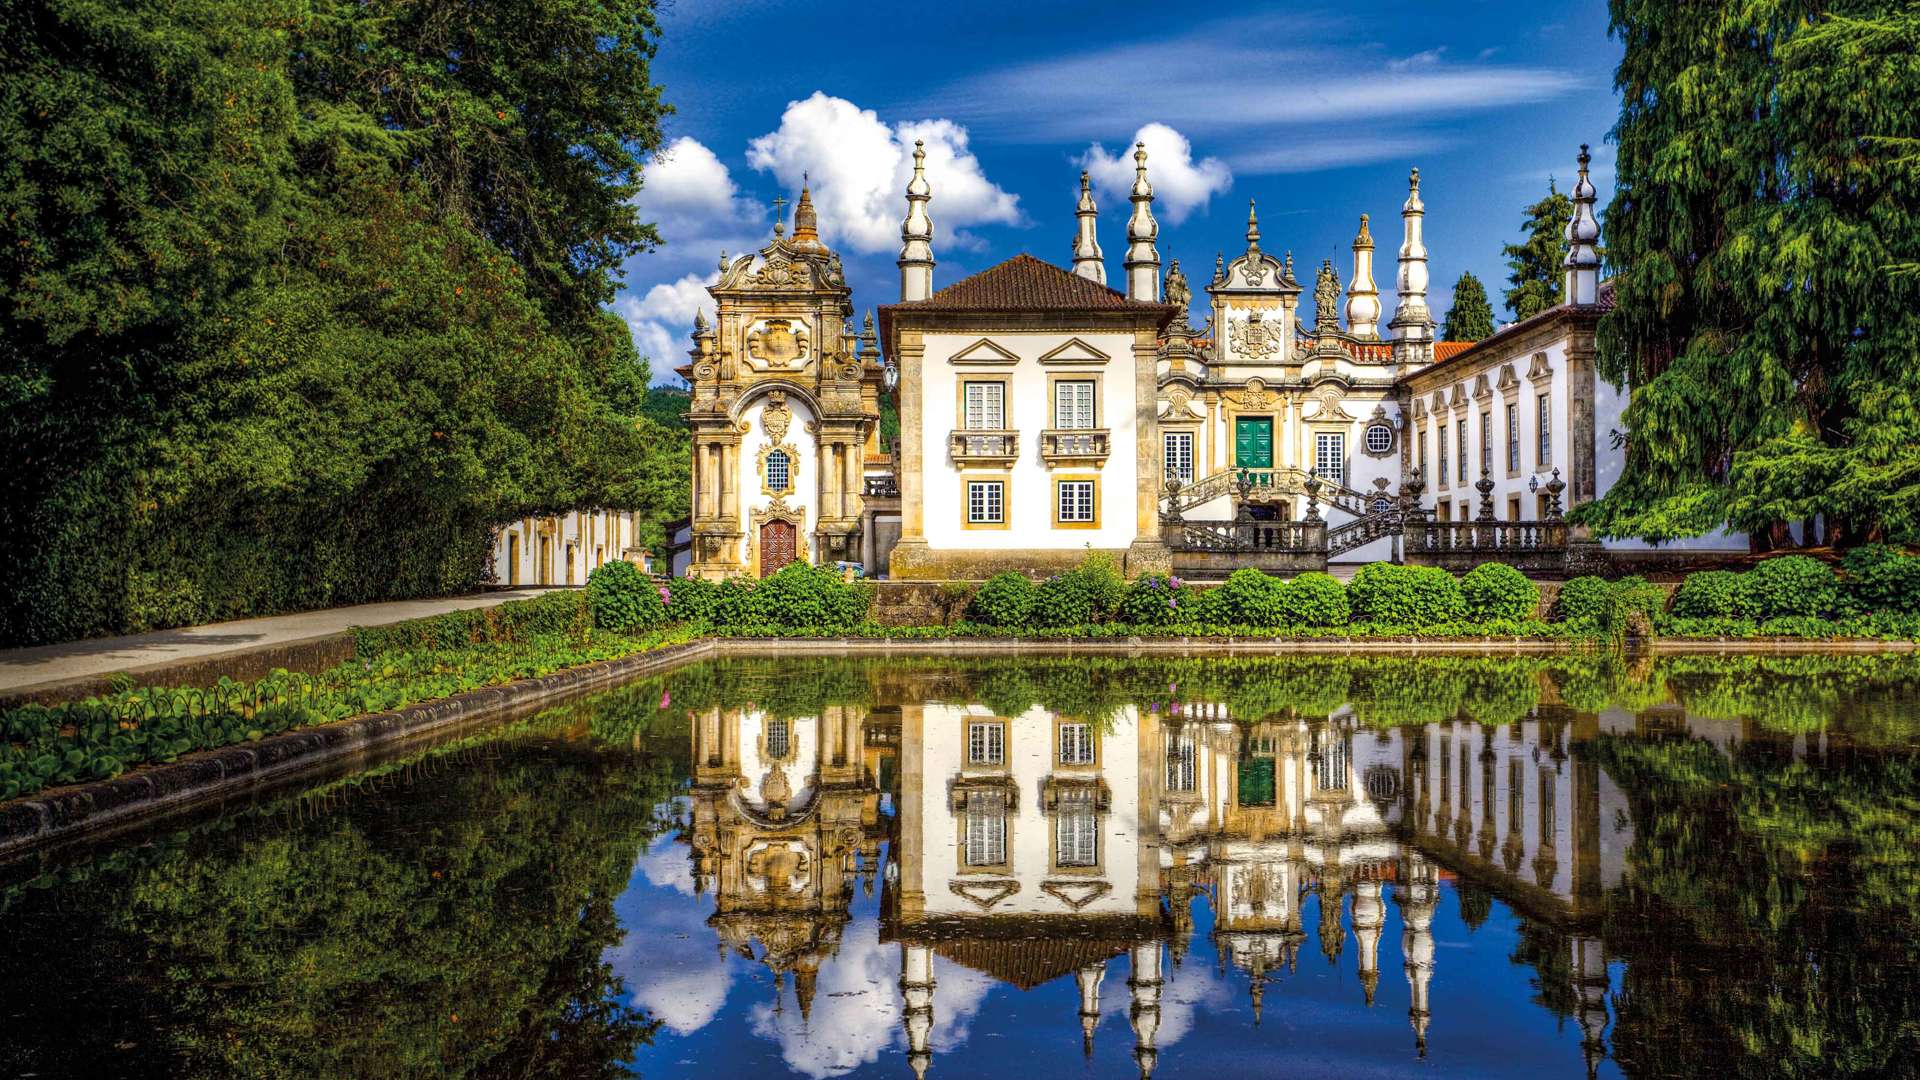 Mateus Palace In Vila Real, Portugal